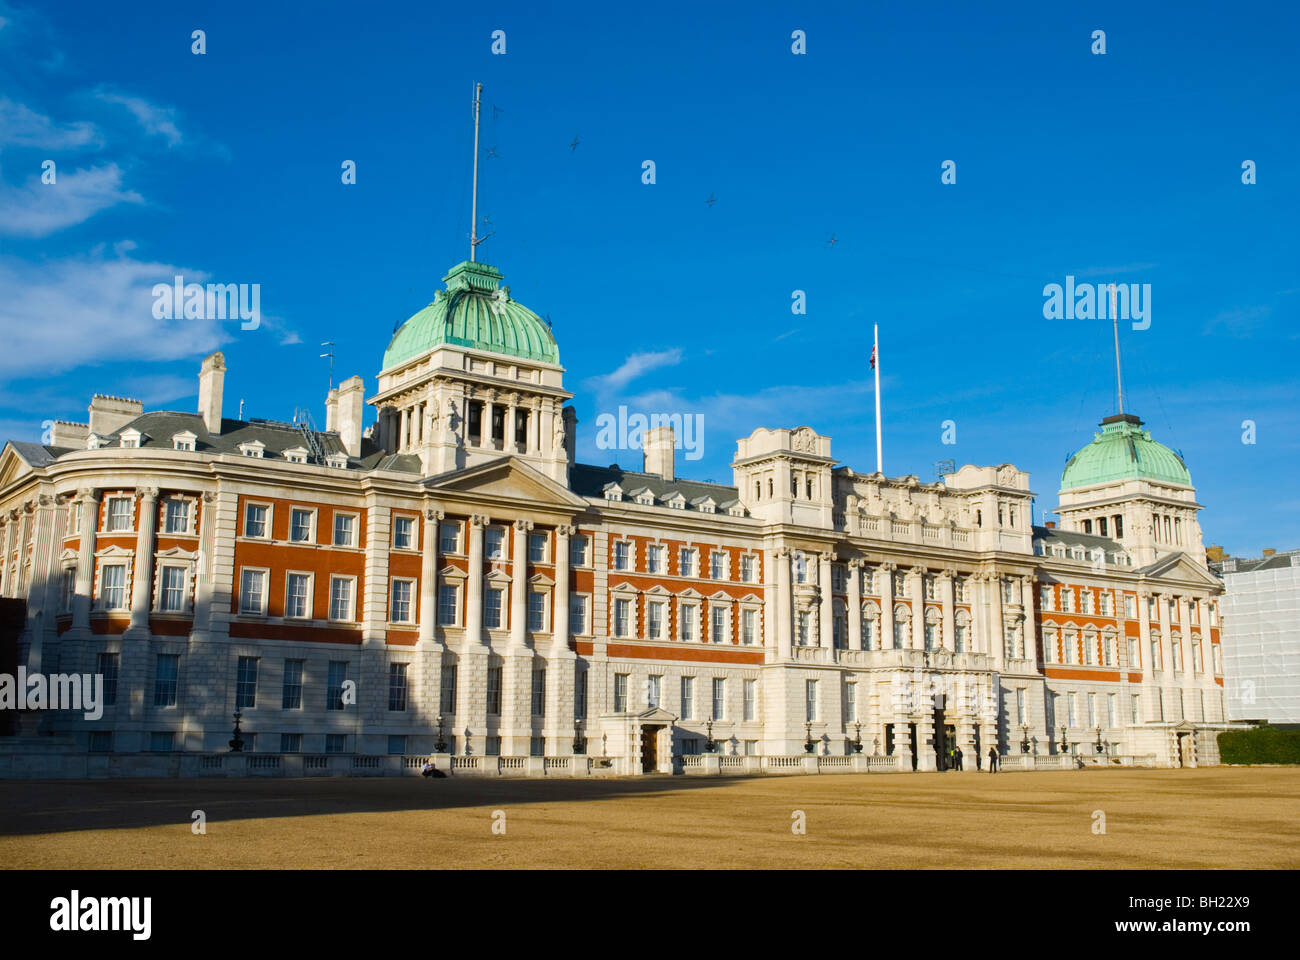 Old Admiralty Buildings Parade Grounds city of Westminster central London England UK Stock Photo